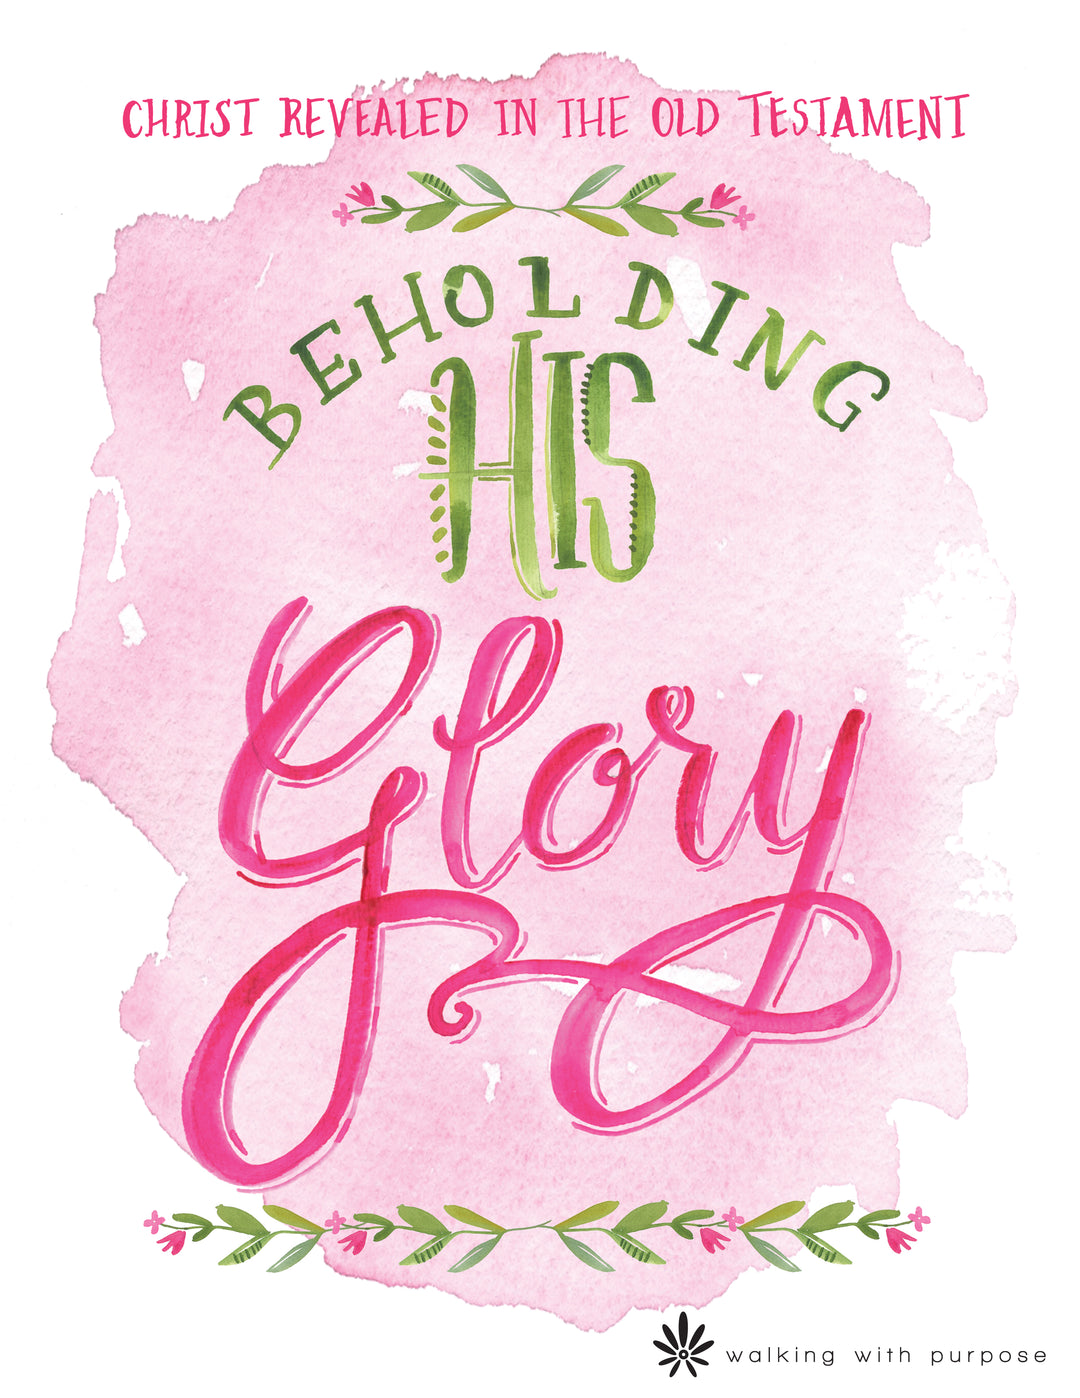 Beholding His Glory cover